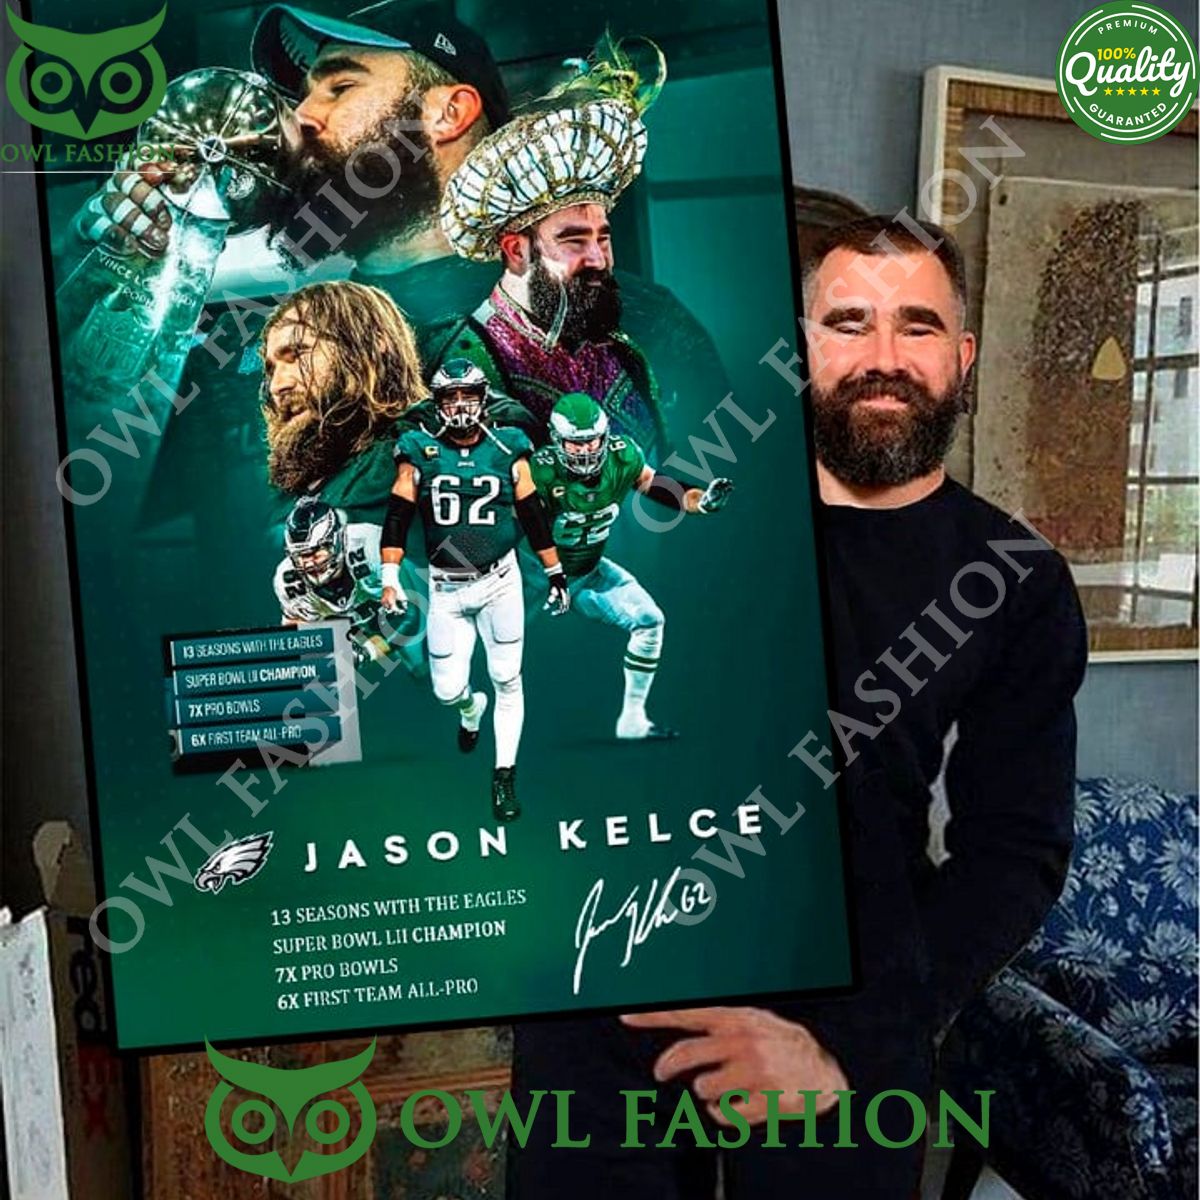 thank you for memories jason kelce 13 seasons with the eagles 7x pro bowls legender poster 1 tpFtr.jpg